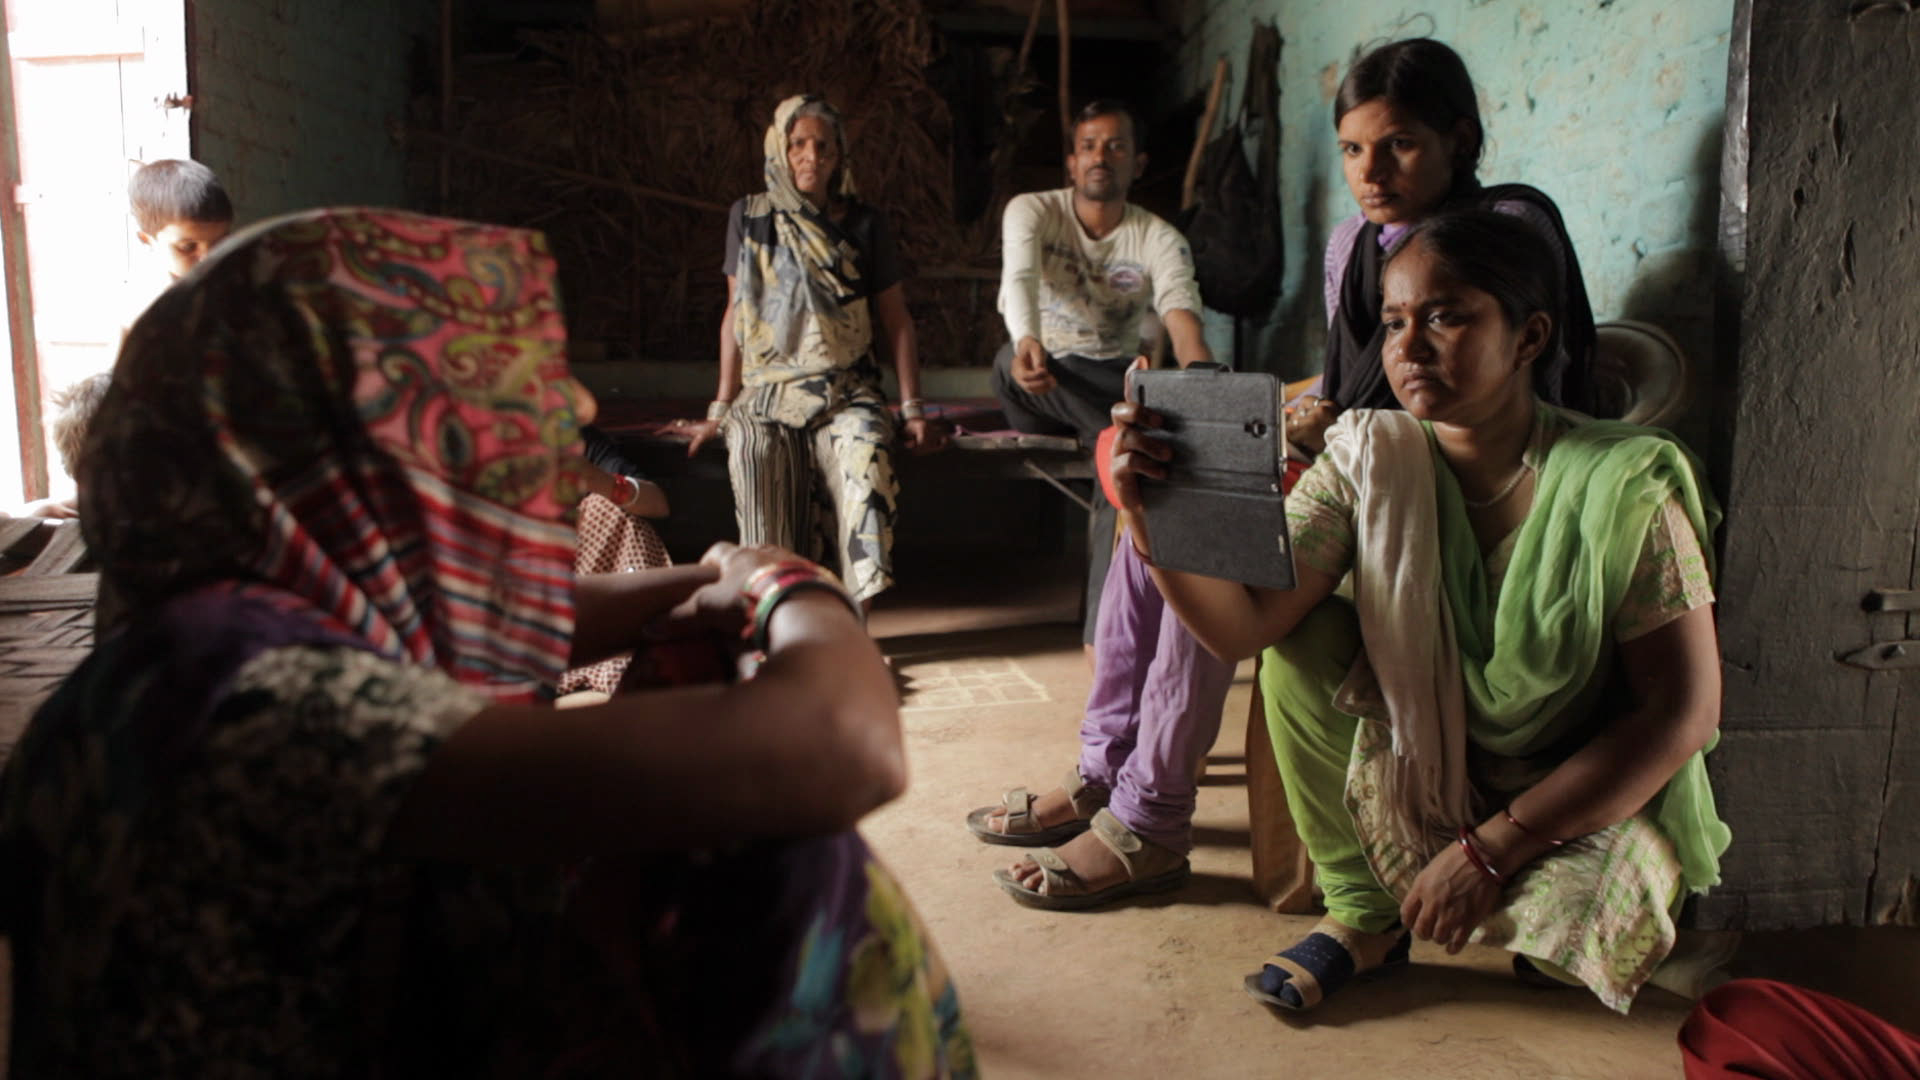 Khabar Lahariya journalists Meera (right) and Suneeta (second right) in a still from Writing with Fire. The film about a women-only digital news agency in India has been selected for the Sundance Film Festival’s World Cinema Documentary Competition.